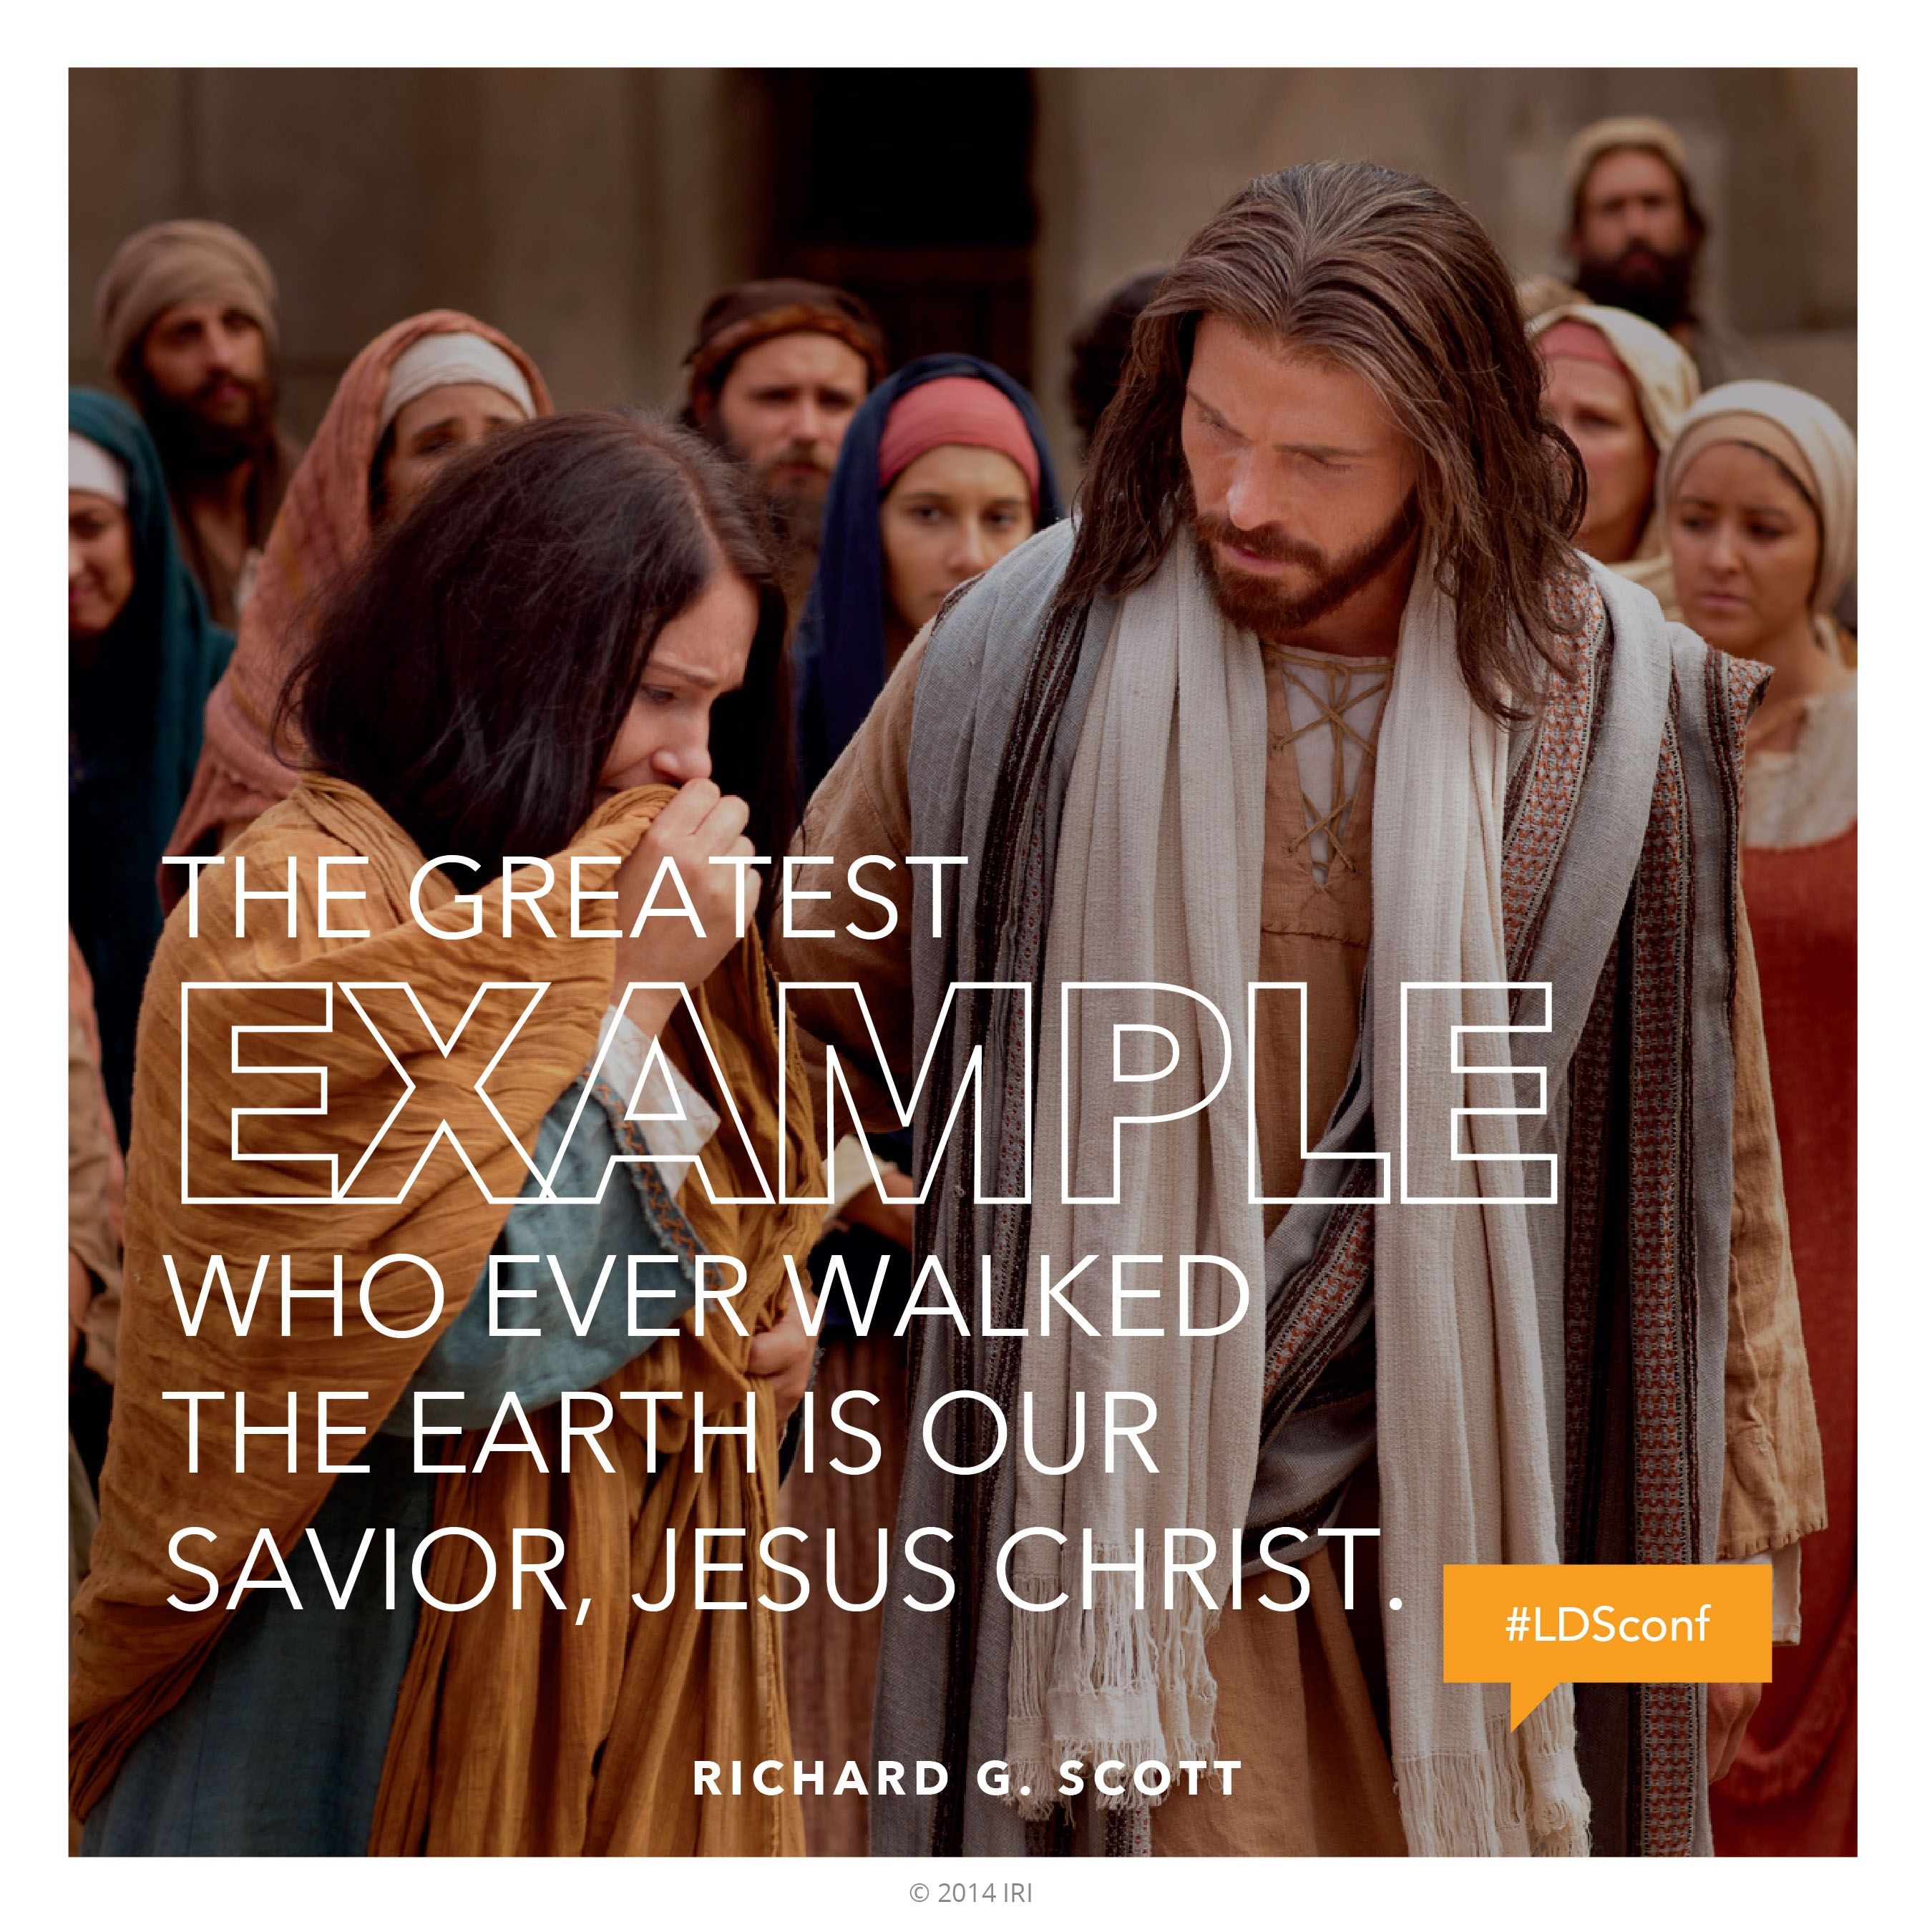 “The greatest example who ever walked the earth is our Savior, Jesus Christ.”—Elder Richard G. Scott, “I Have Given You an Example”